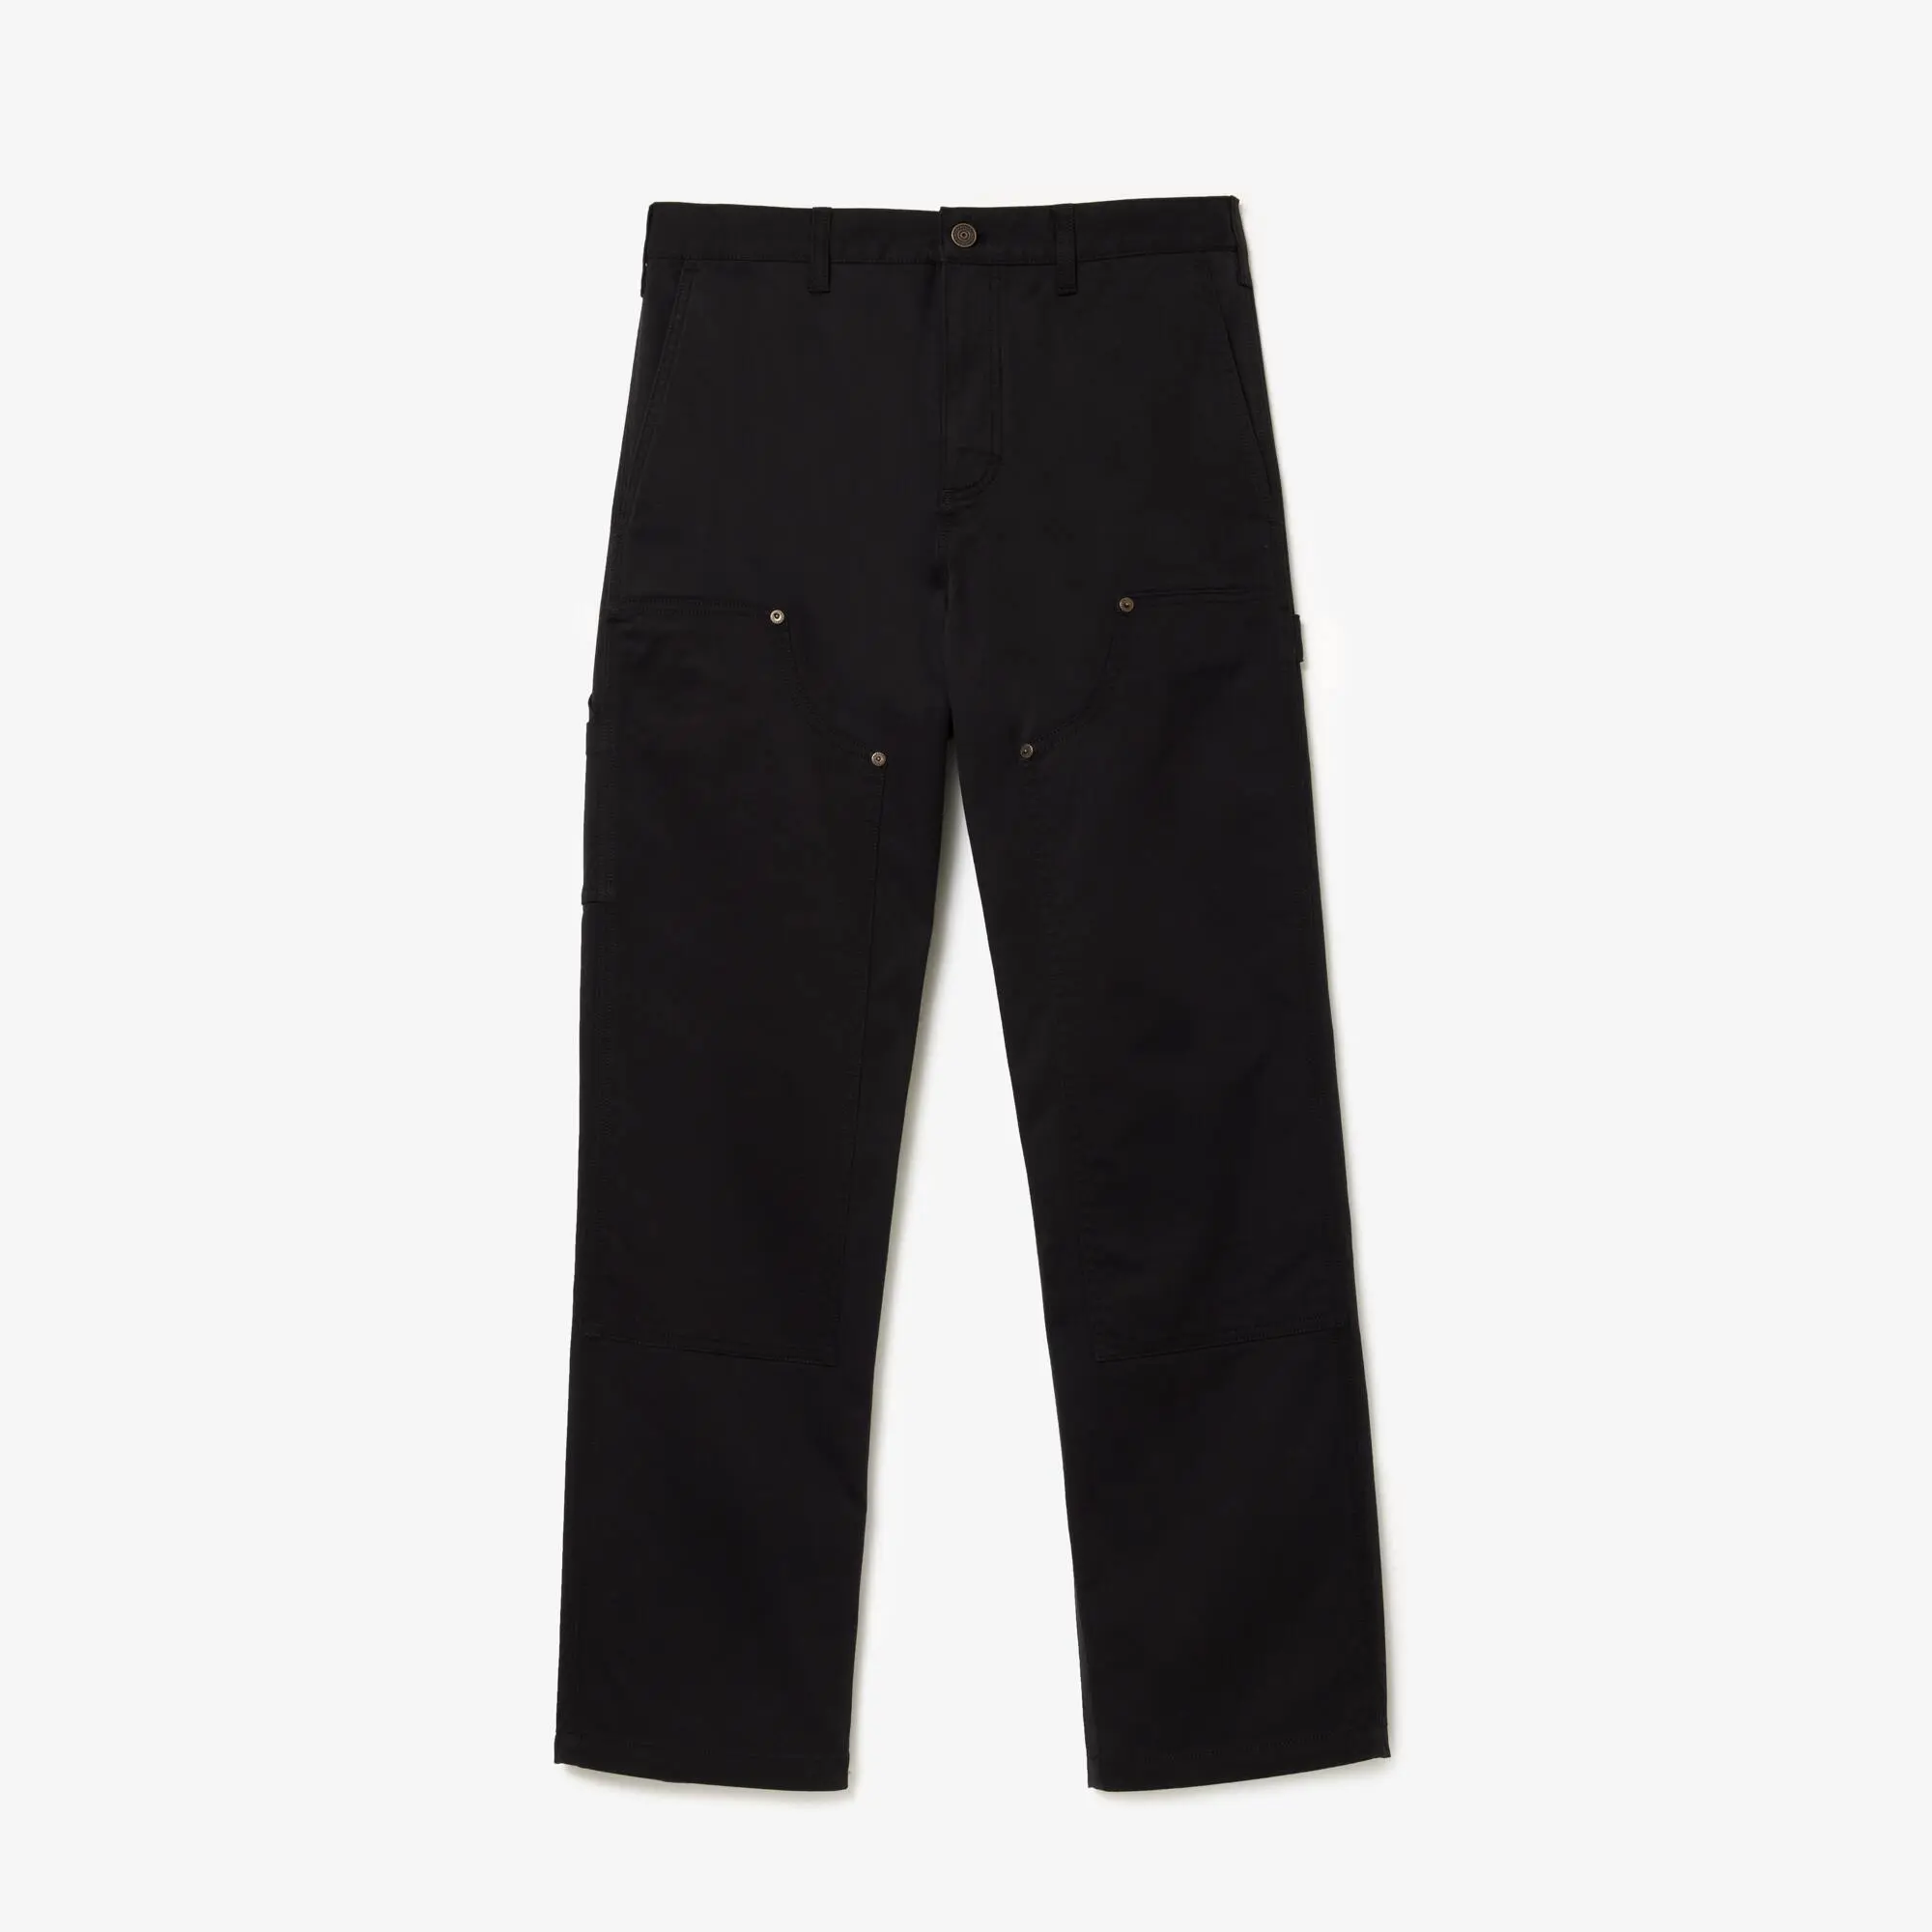 Lacoste Straight Fit Cotton Twill Cargo Pants. 1